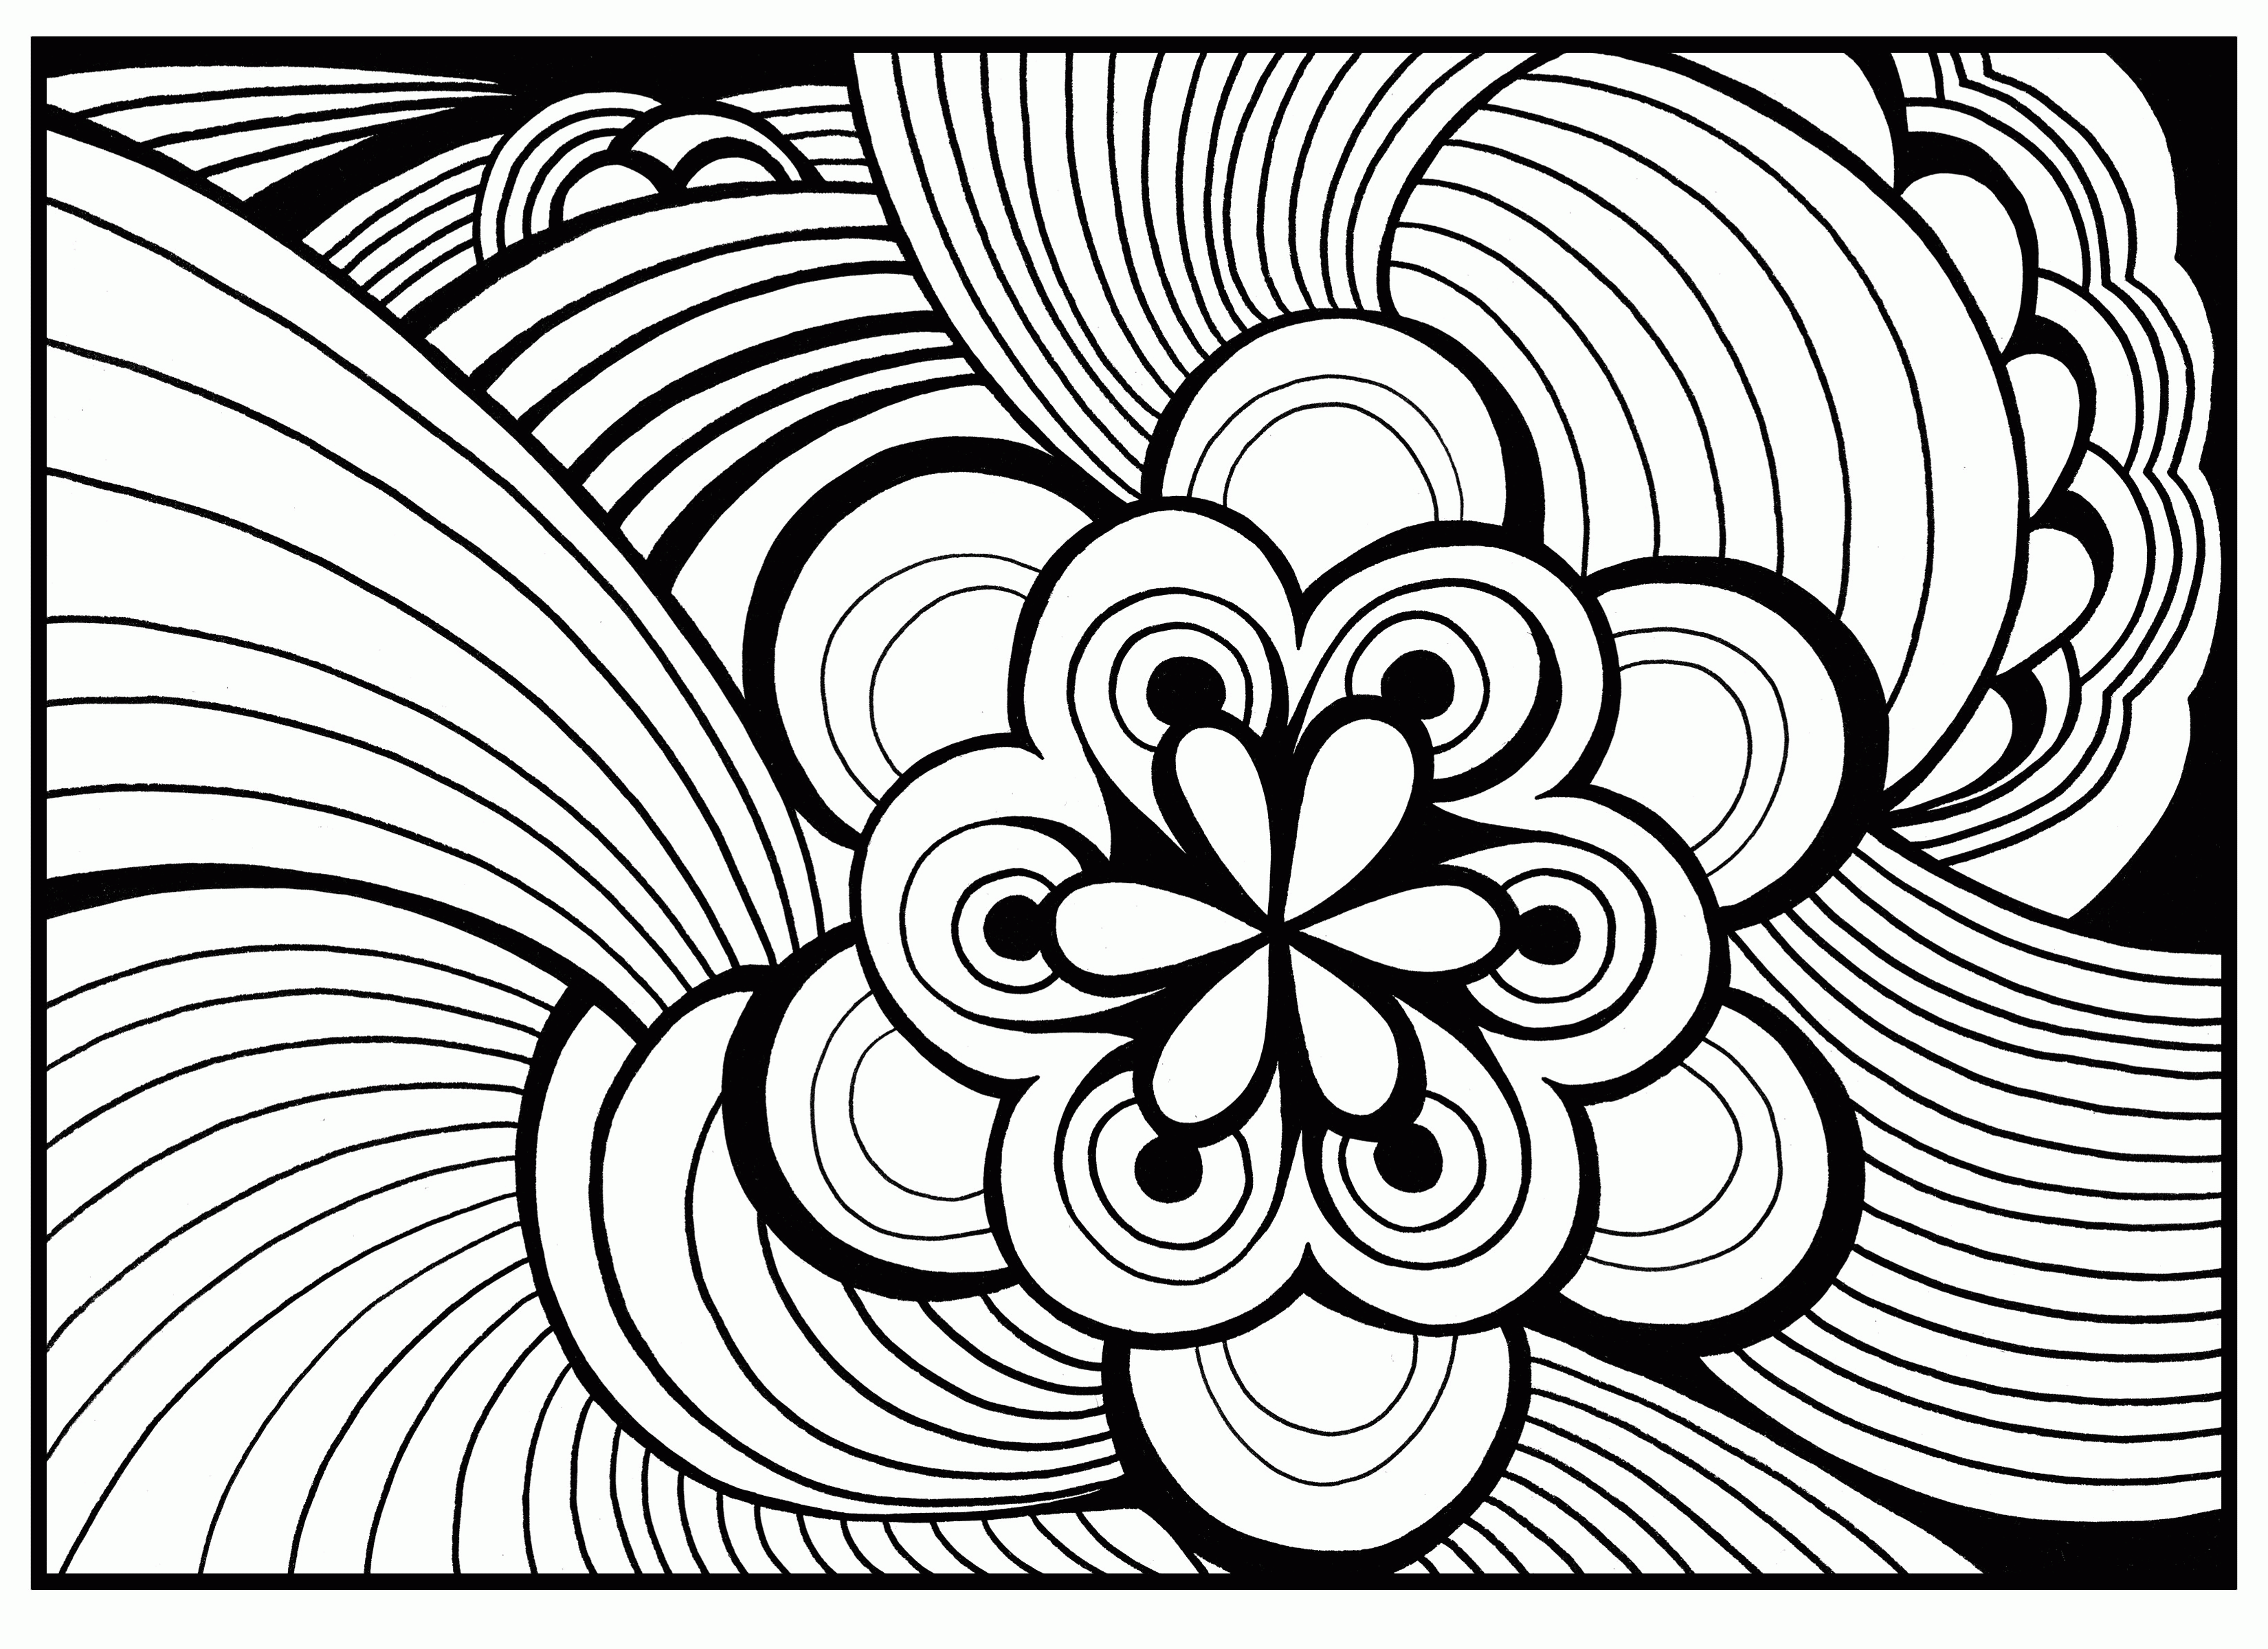 coloring page with abstract design   Clip Art Library